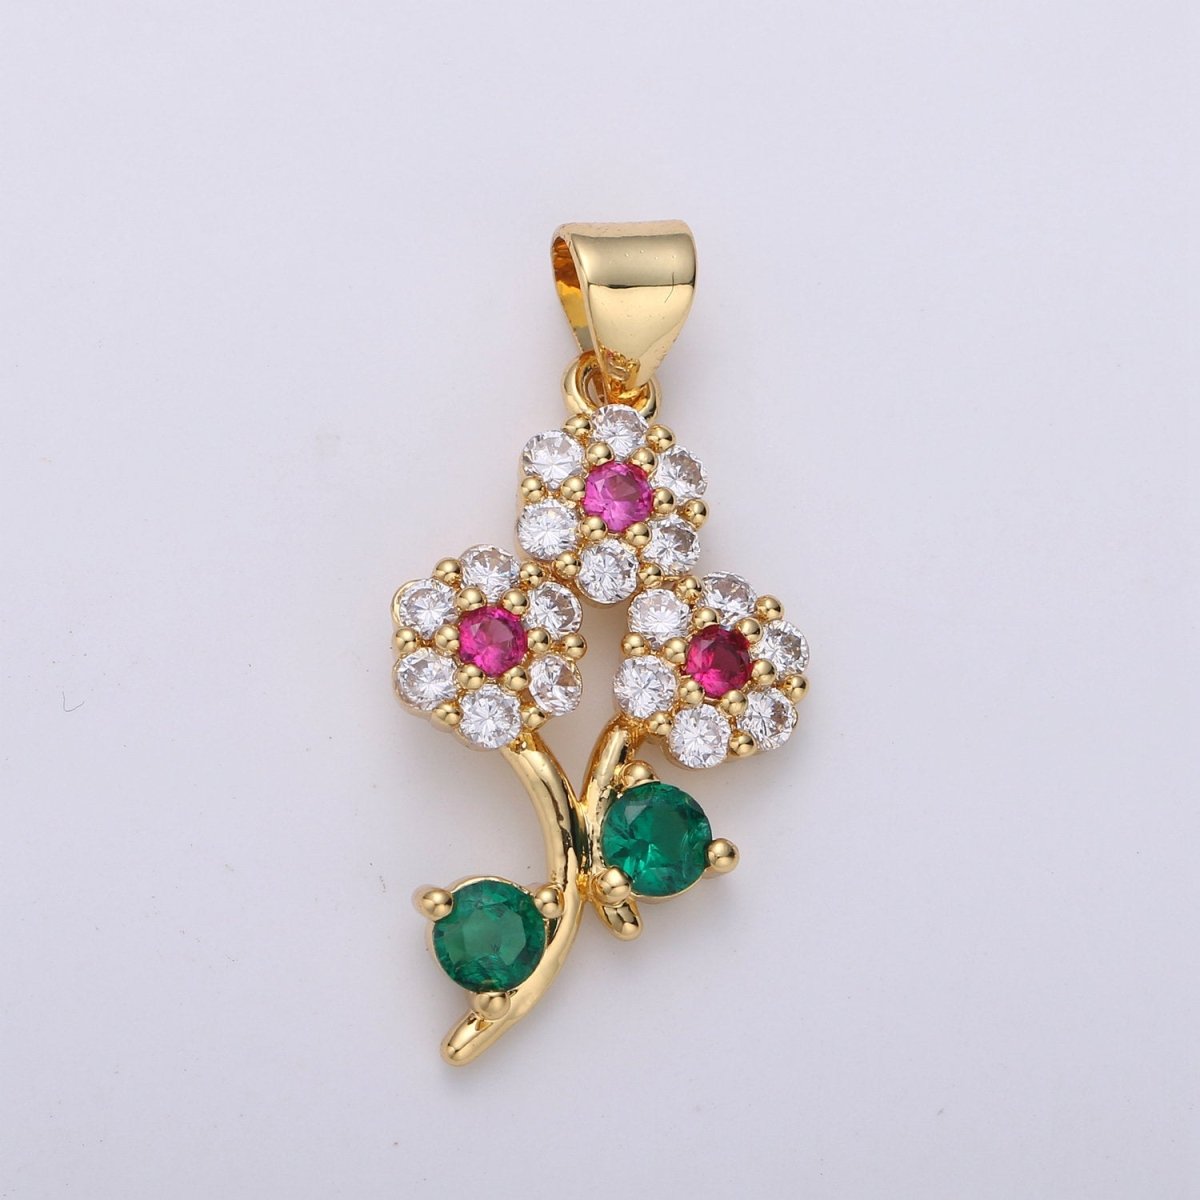 24K Gold Filled Micro Pave Flower Charm, Silver Small Cubic Flower Charm Multi Color Pendant for necklace earring bracelet Component I-601 I-602 - DLUXCA